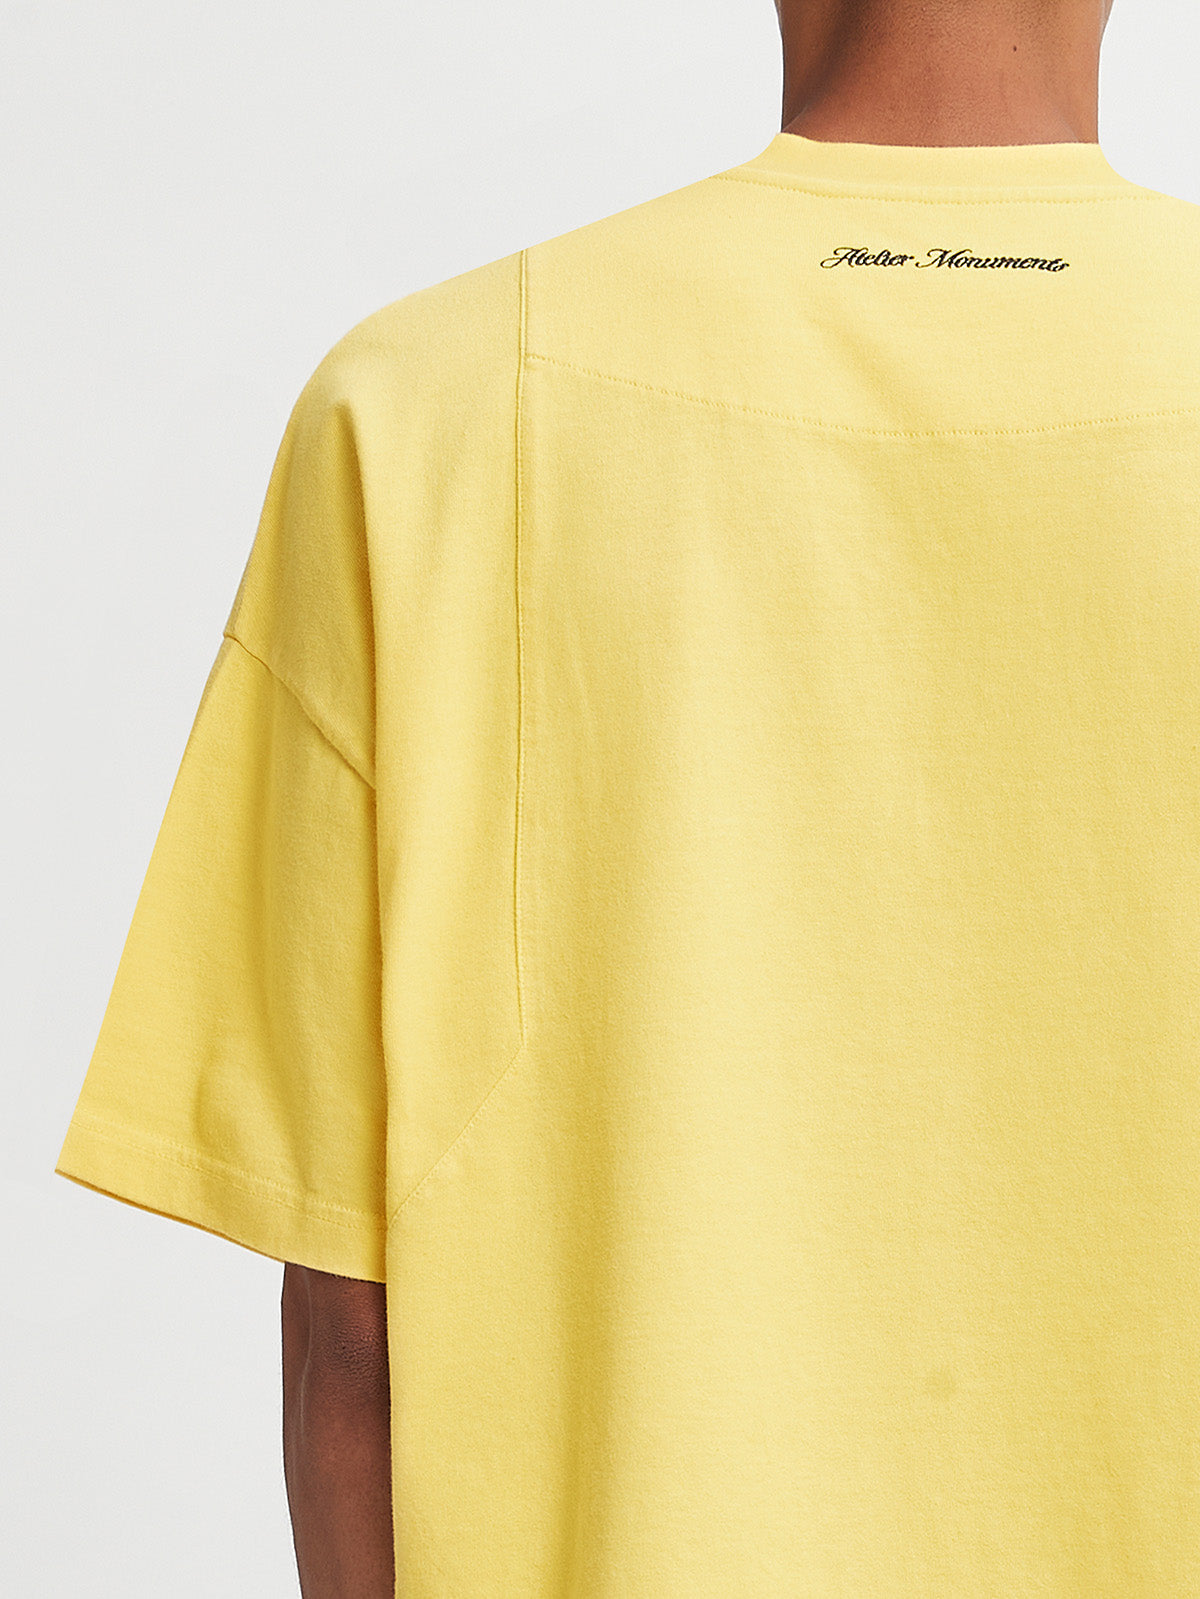 T-SHIRT ATELIER MONUMENTS - YELLOW